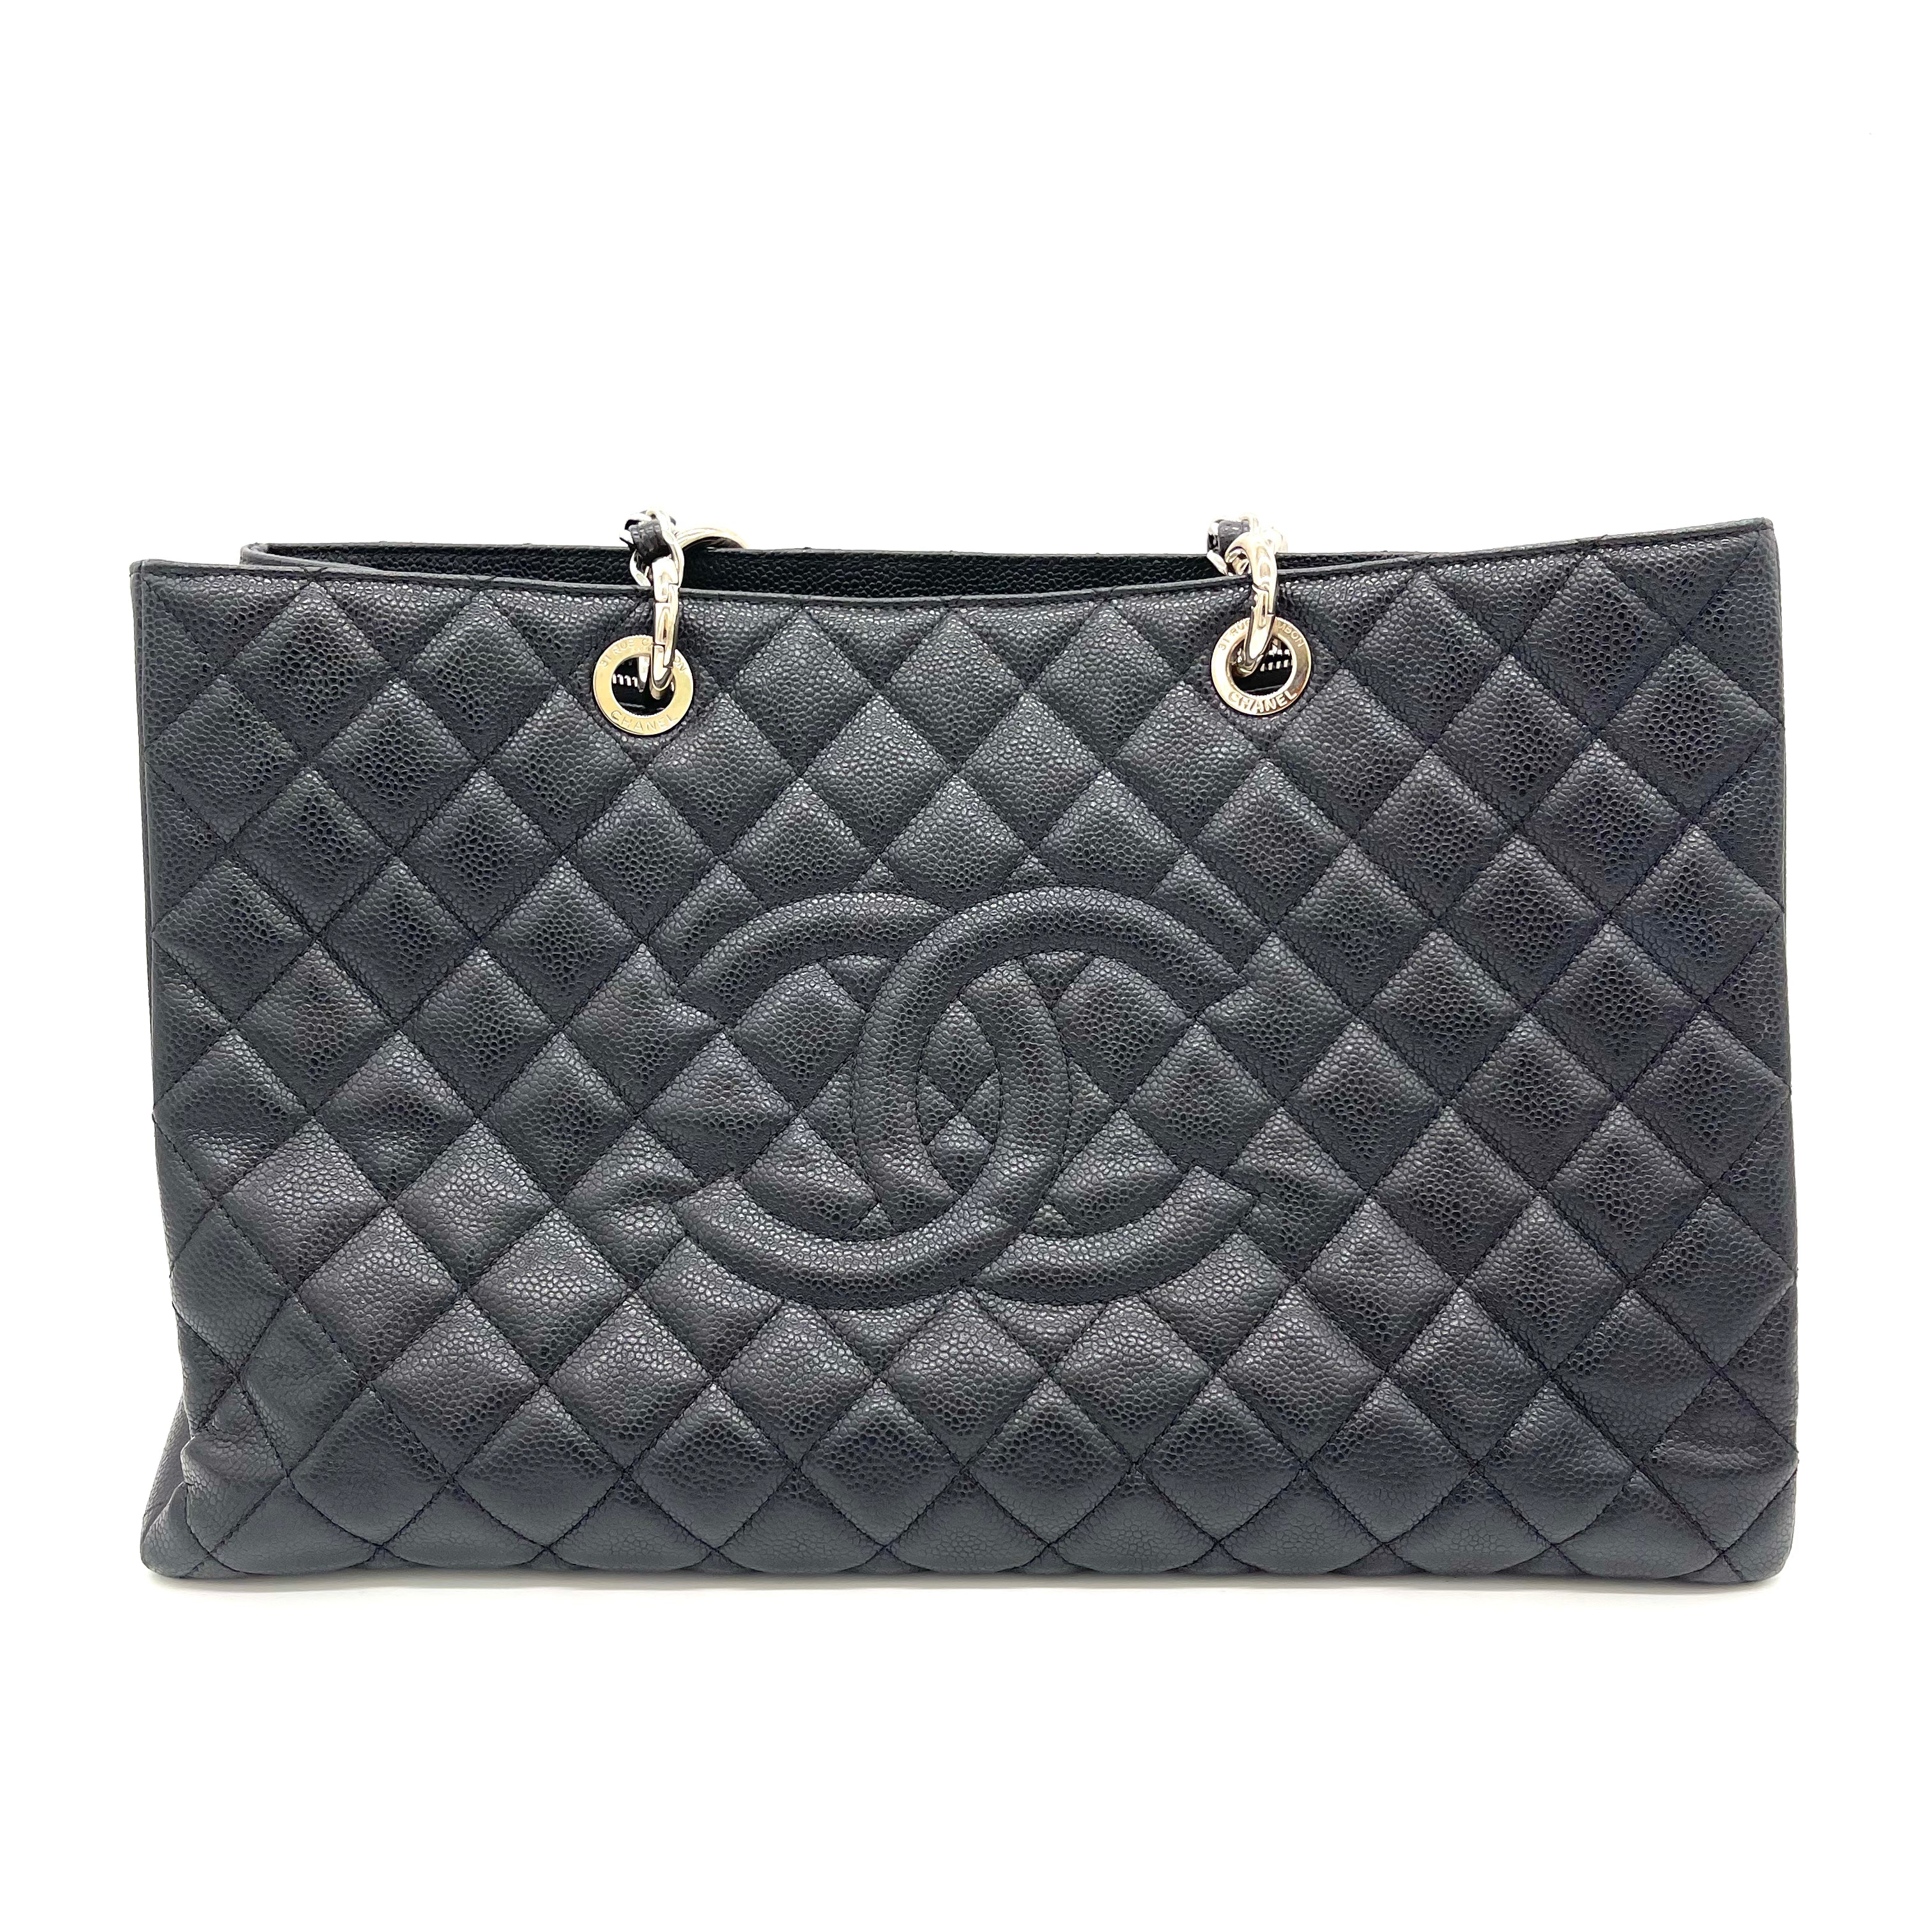 Black Quilted Caviar Grand Shopping Tote Silver Hardware, 2008-2009